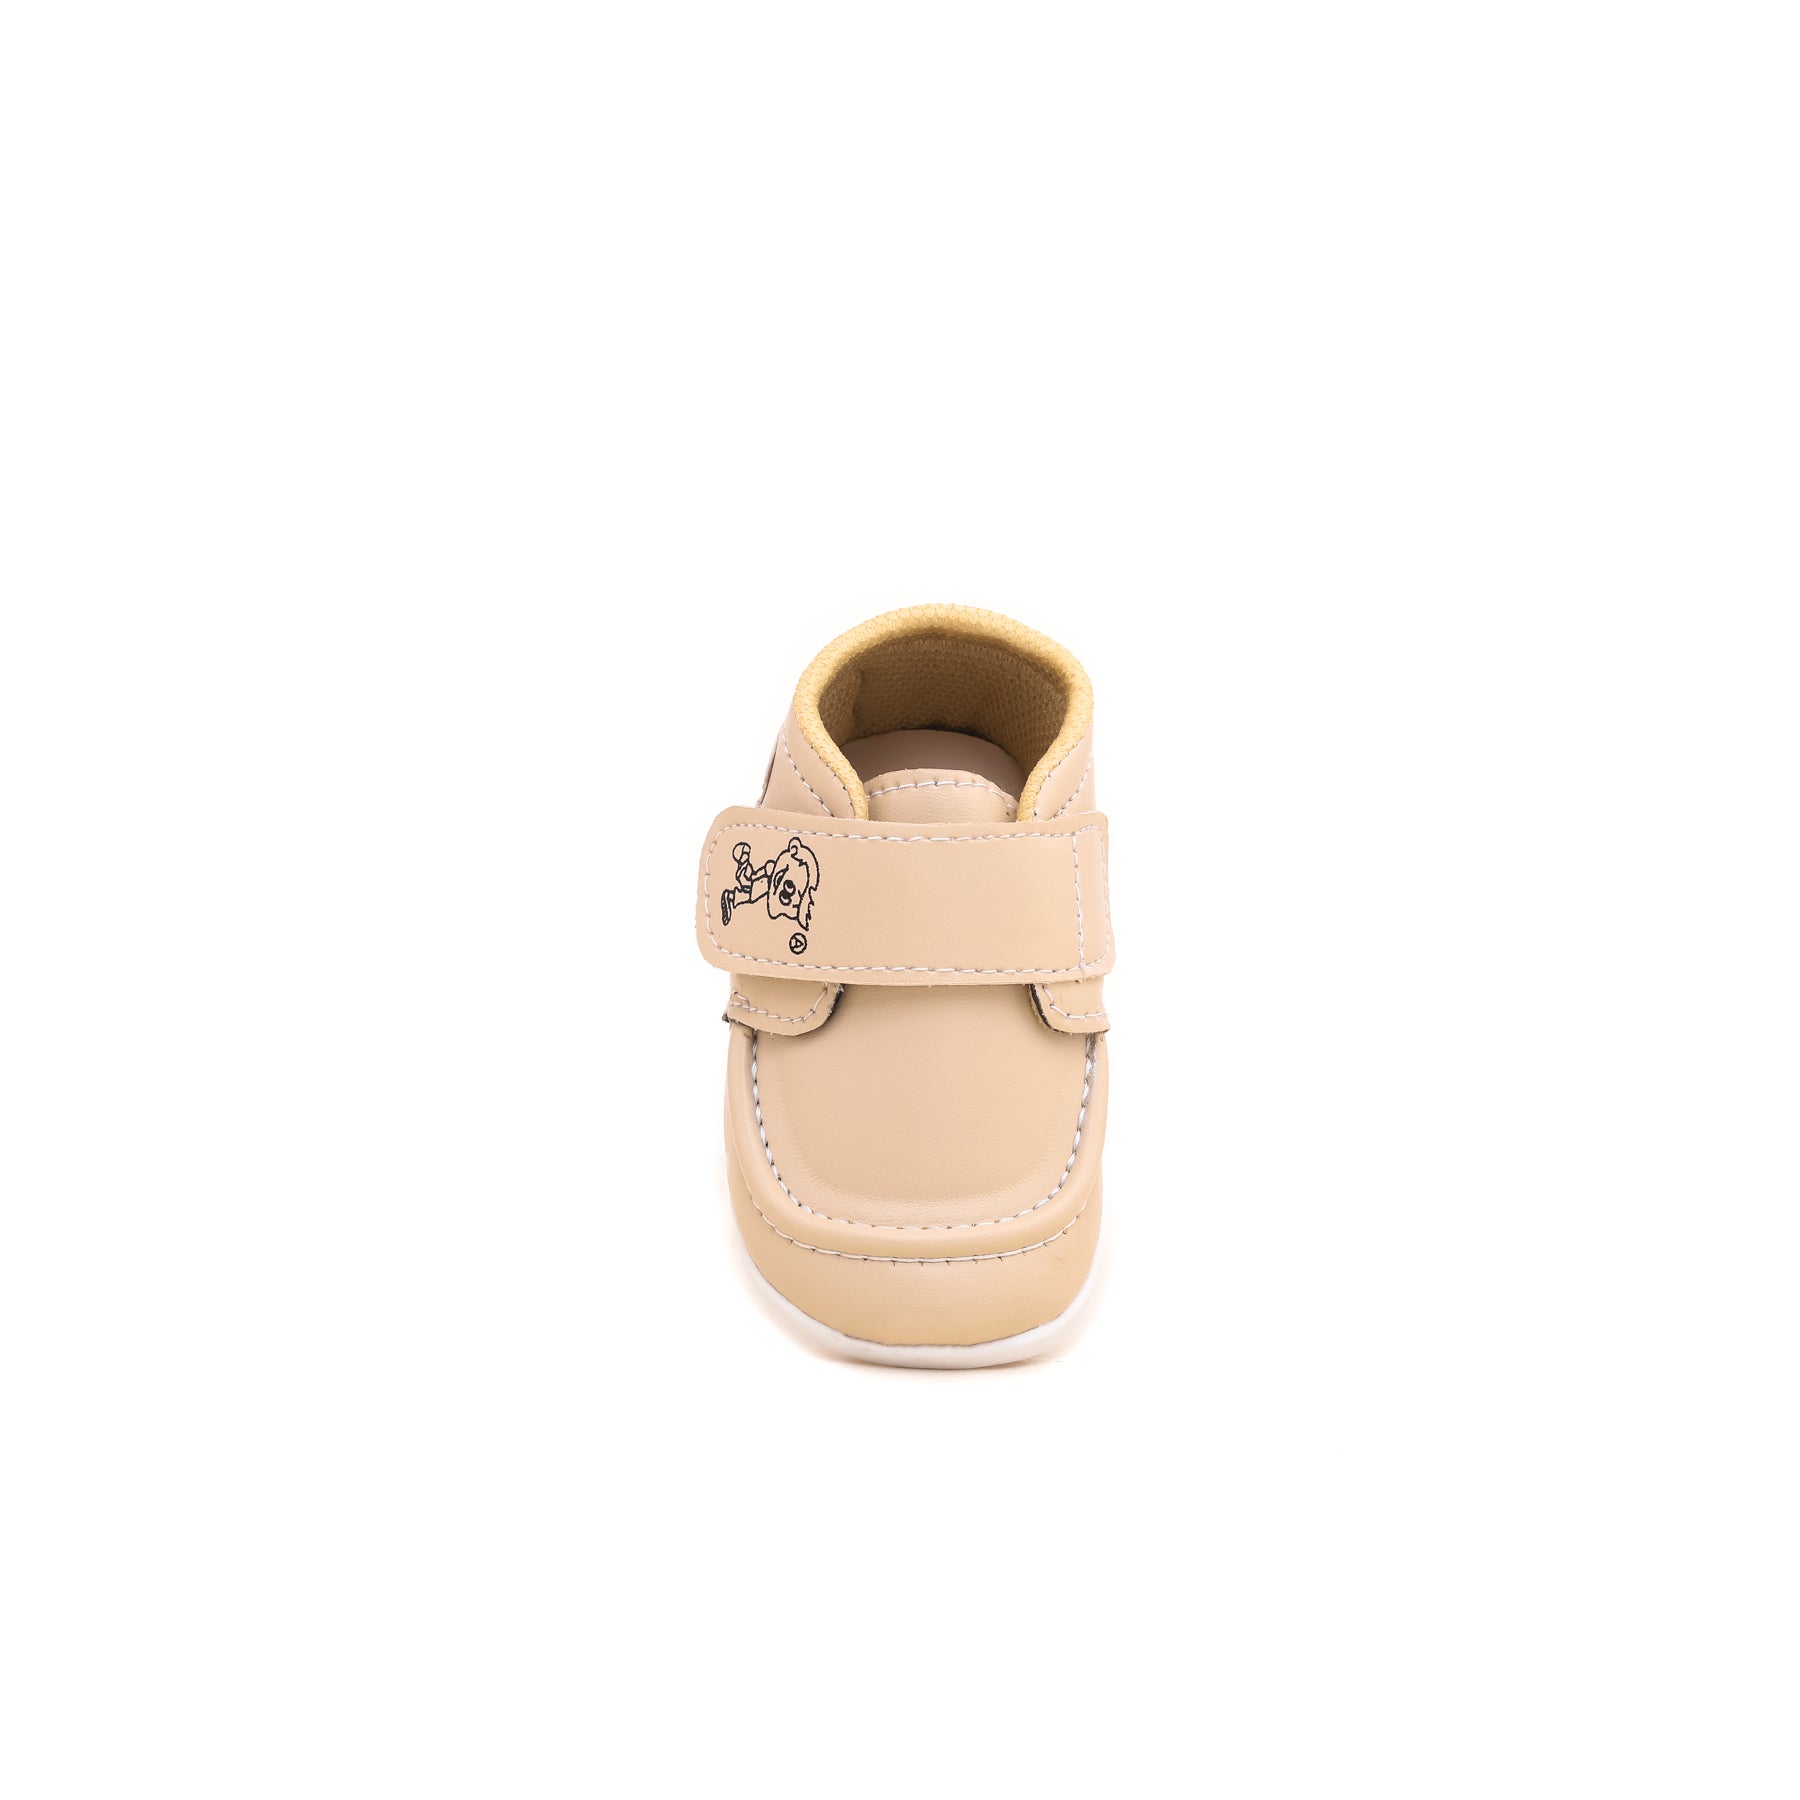 Babies Fawn Casual Booties KD7757